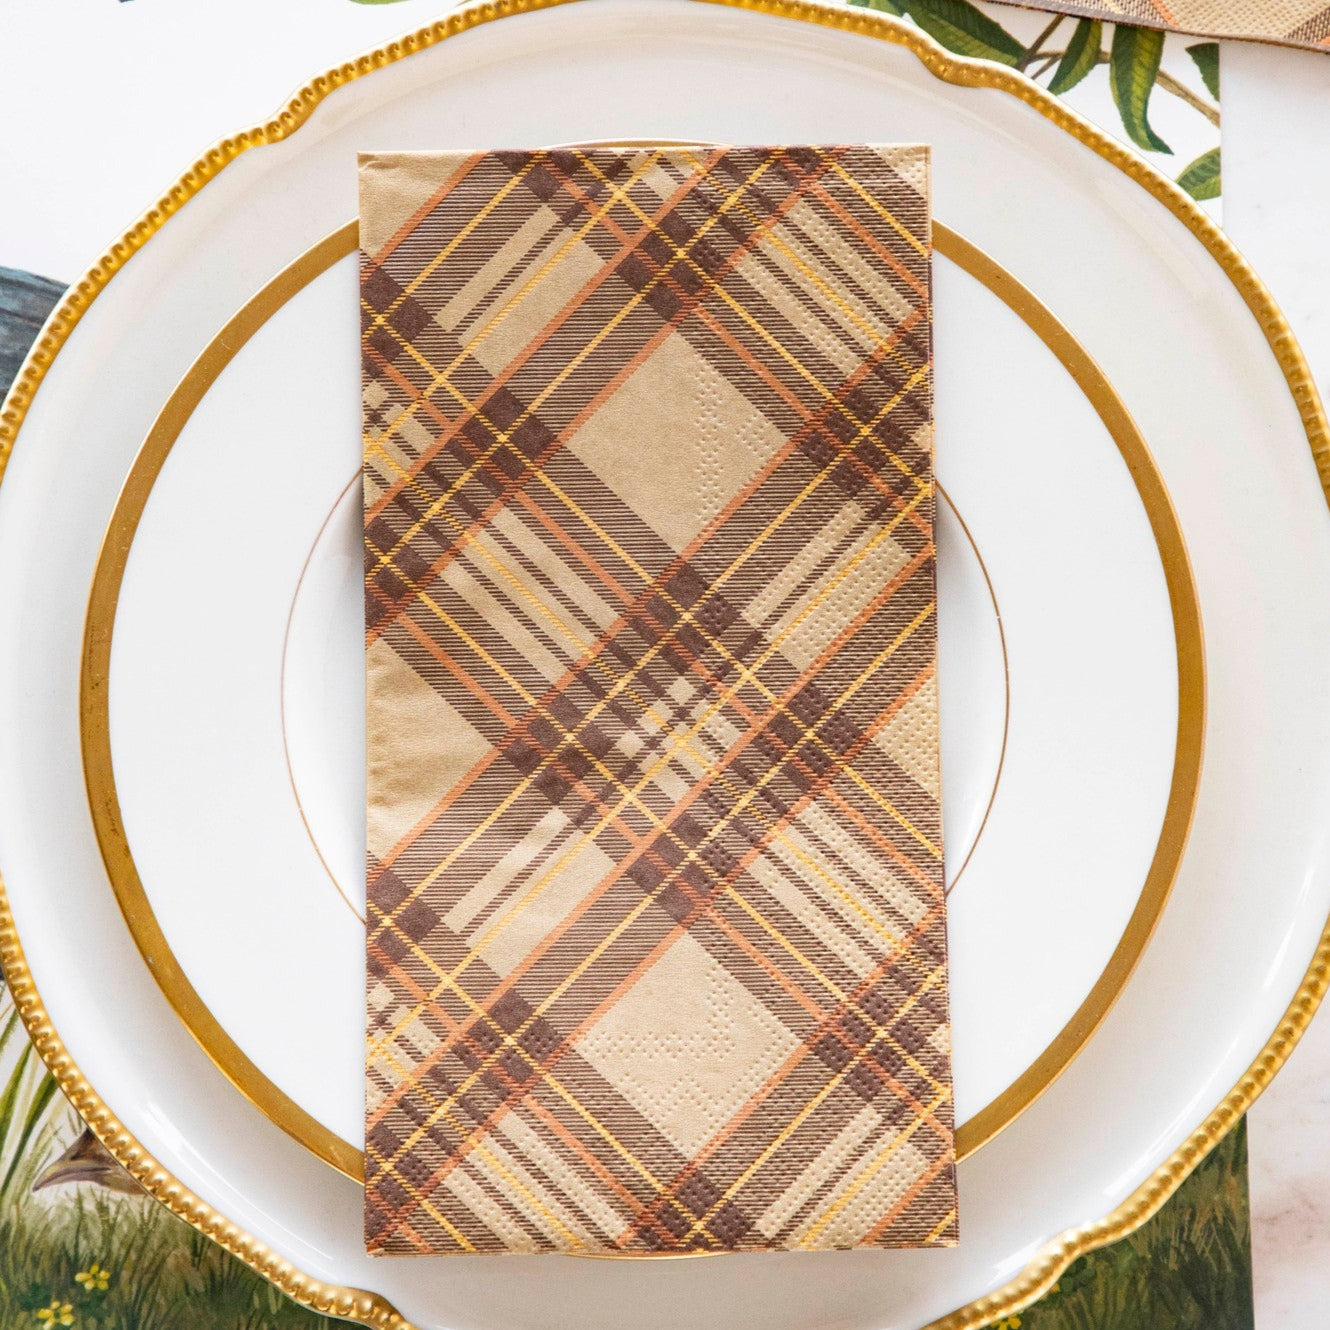 A Hester &amp; Cook Autumn Plaid Napkin, perfect for Thanksgiving.